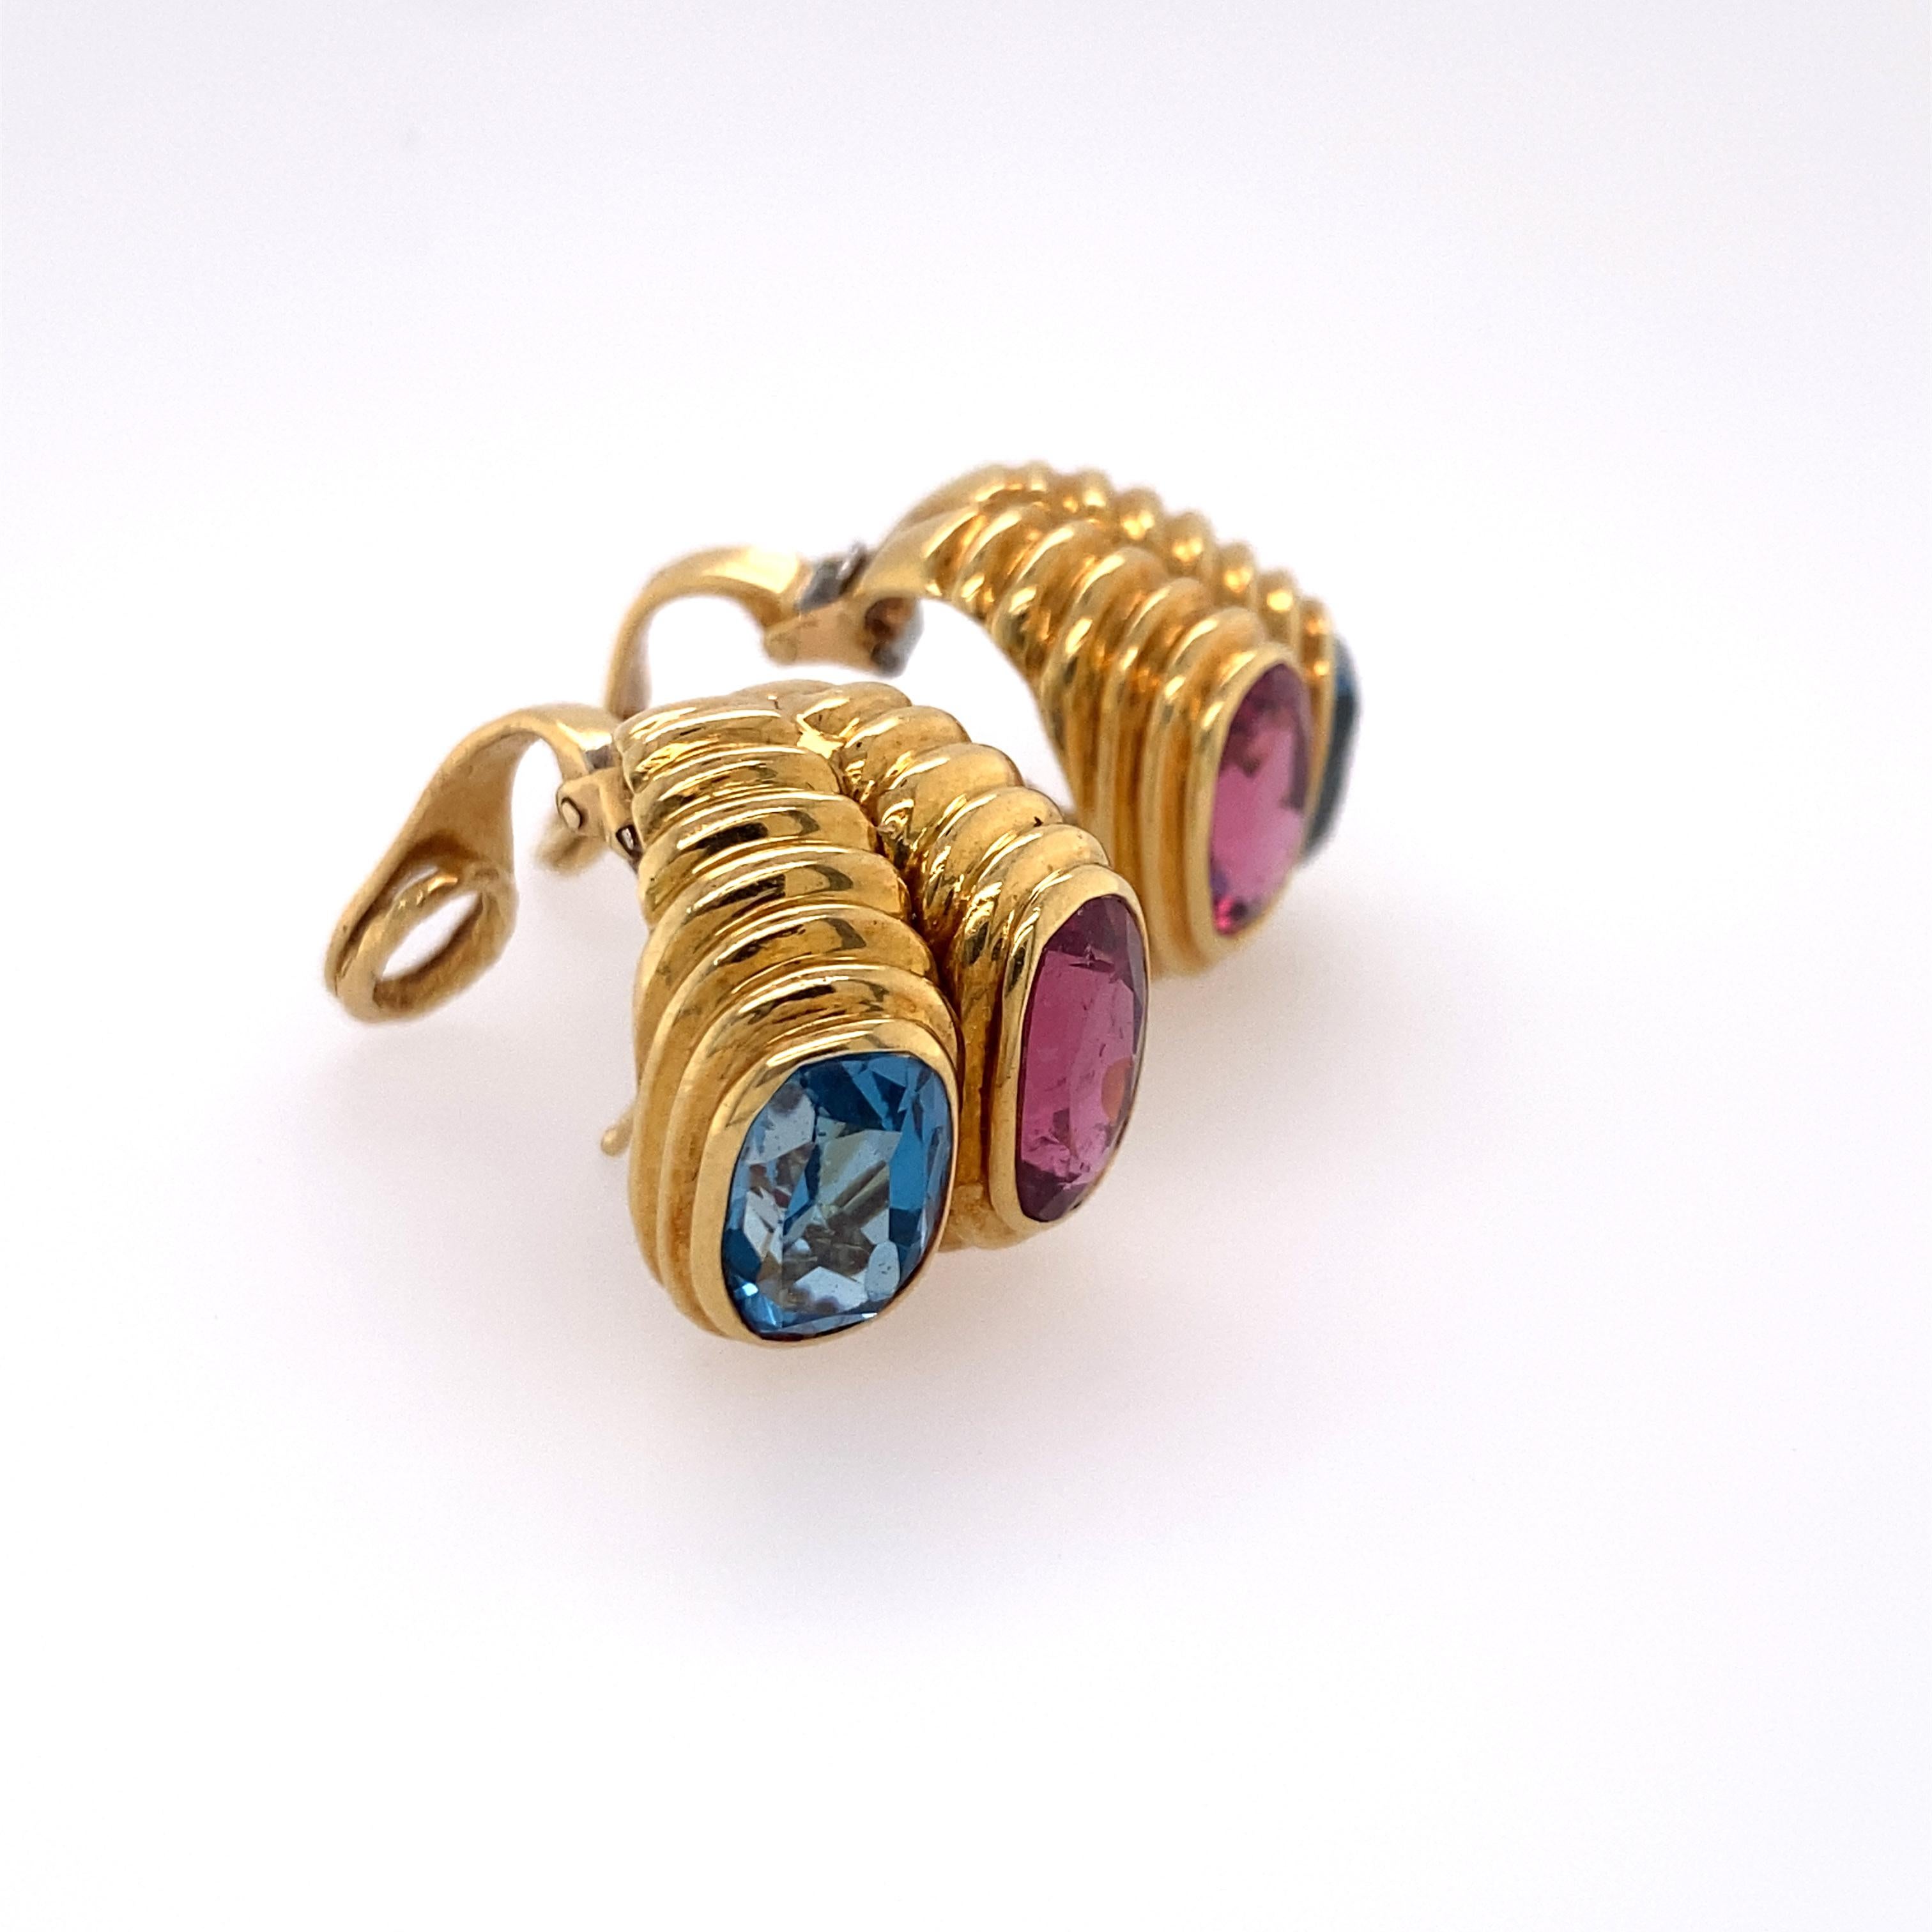 Pair of Pink Tourmaline and Blue Topaz Clip Earrings. 13.0 dwt (20.22 g) 